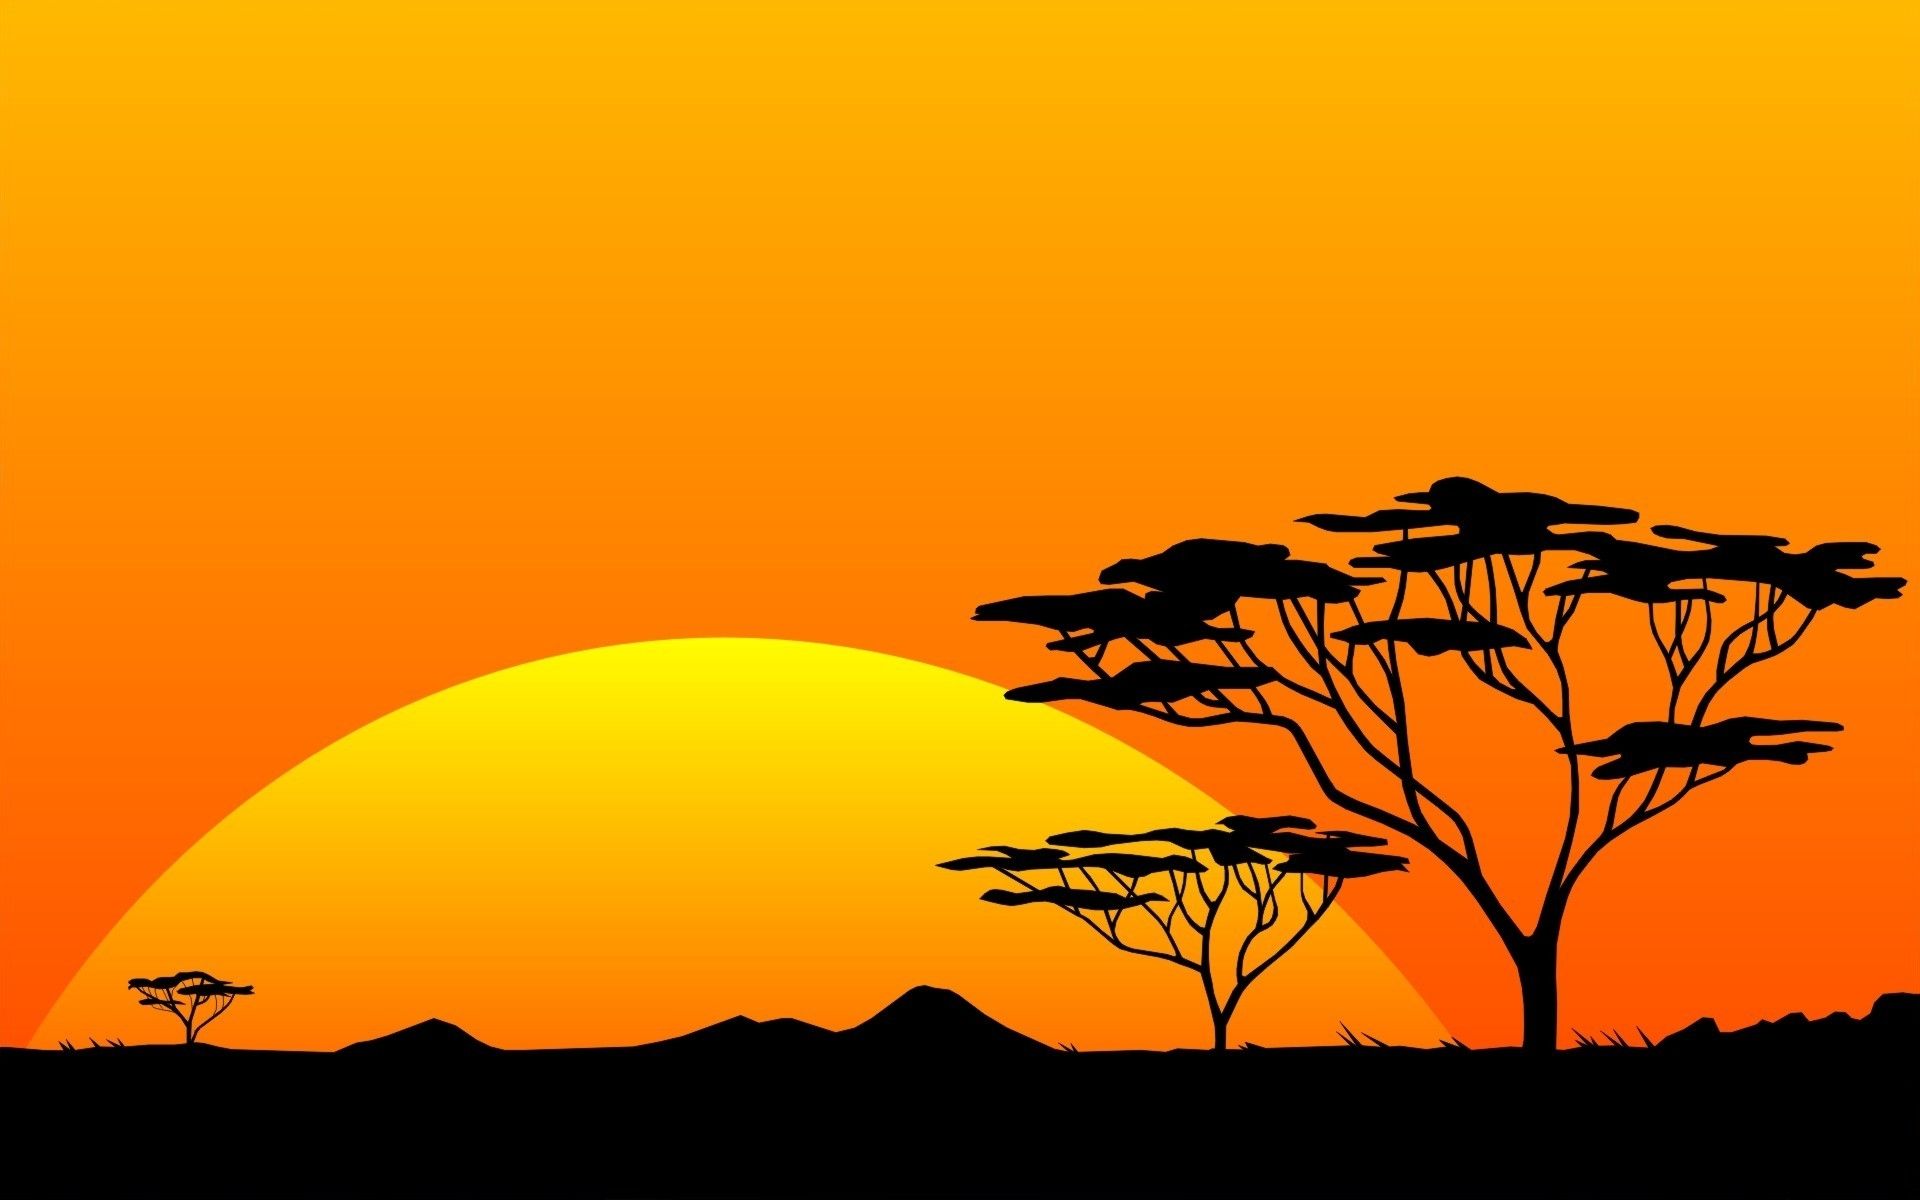 An illustration of a savannah landscape with trees and a sunset - Sun